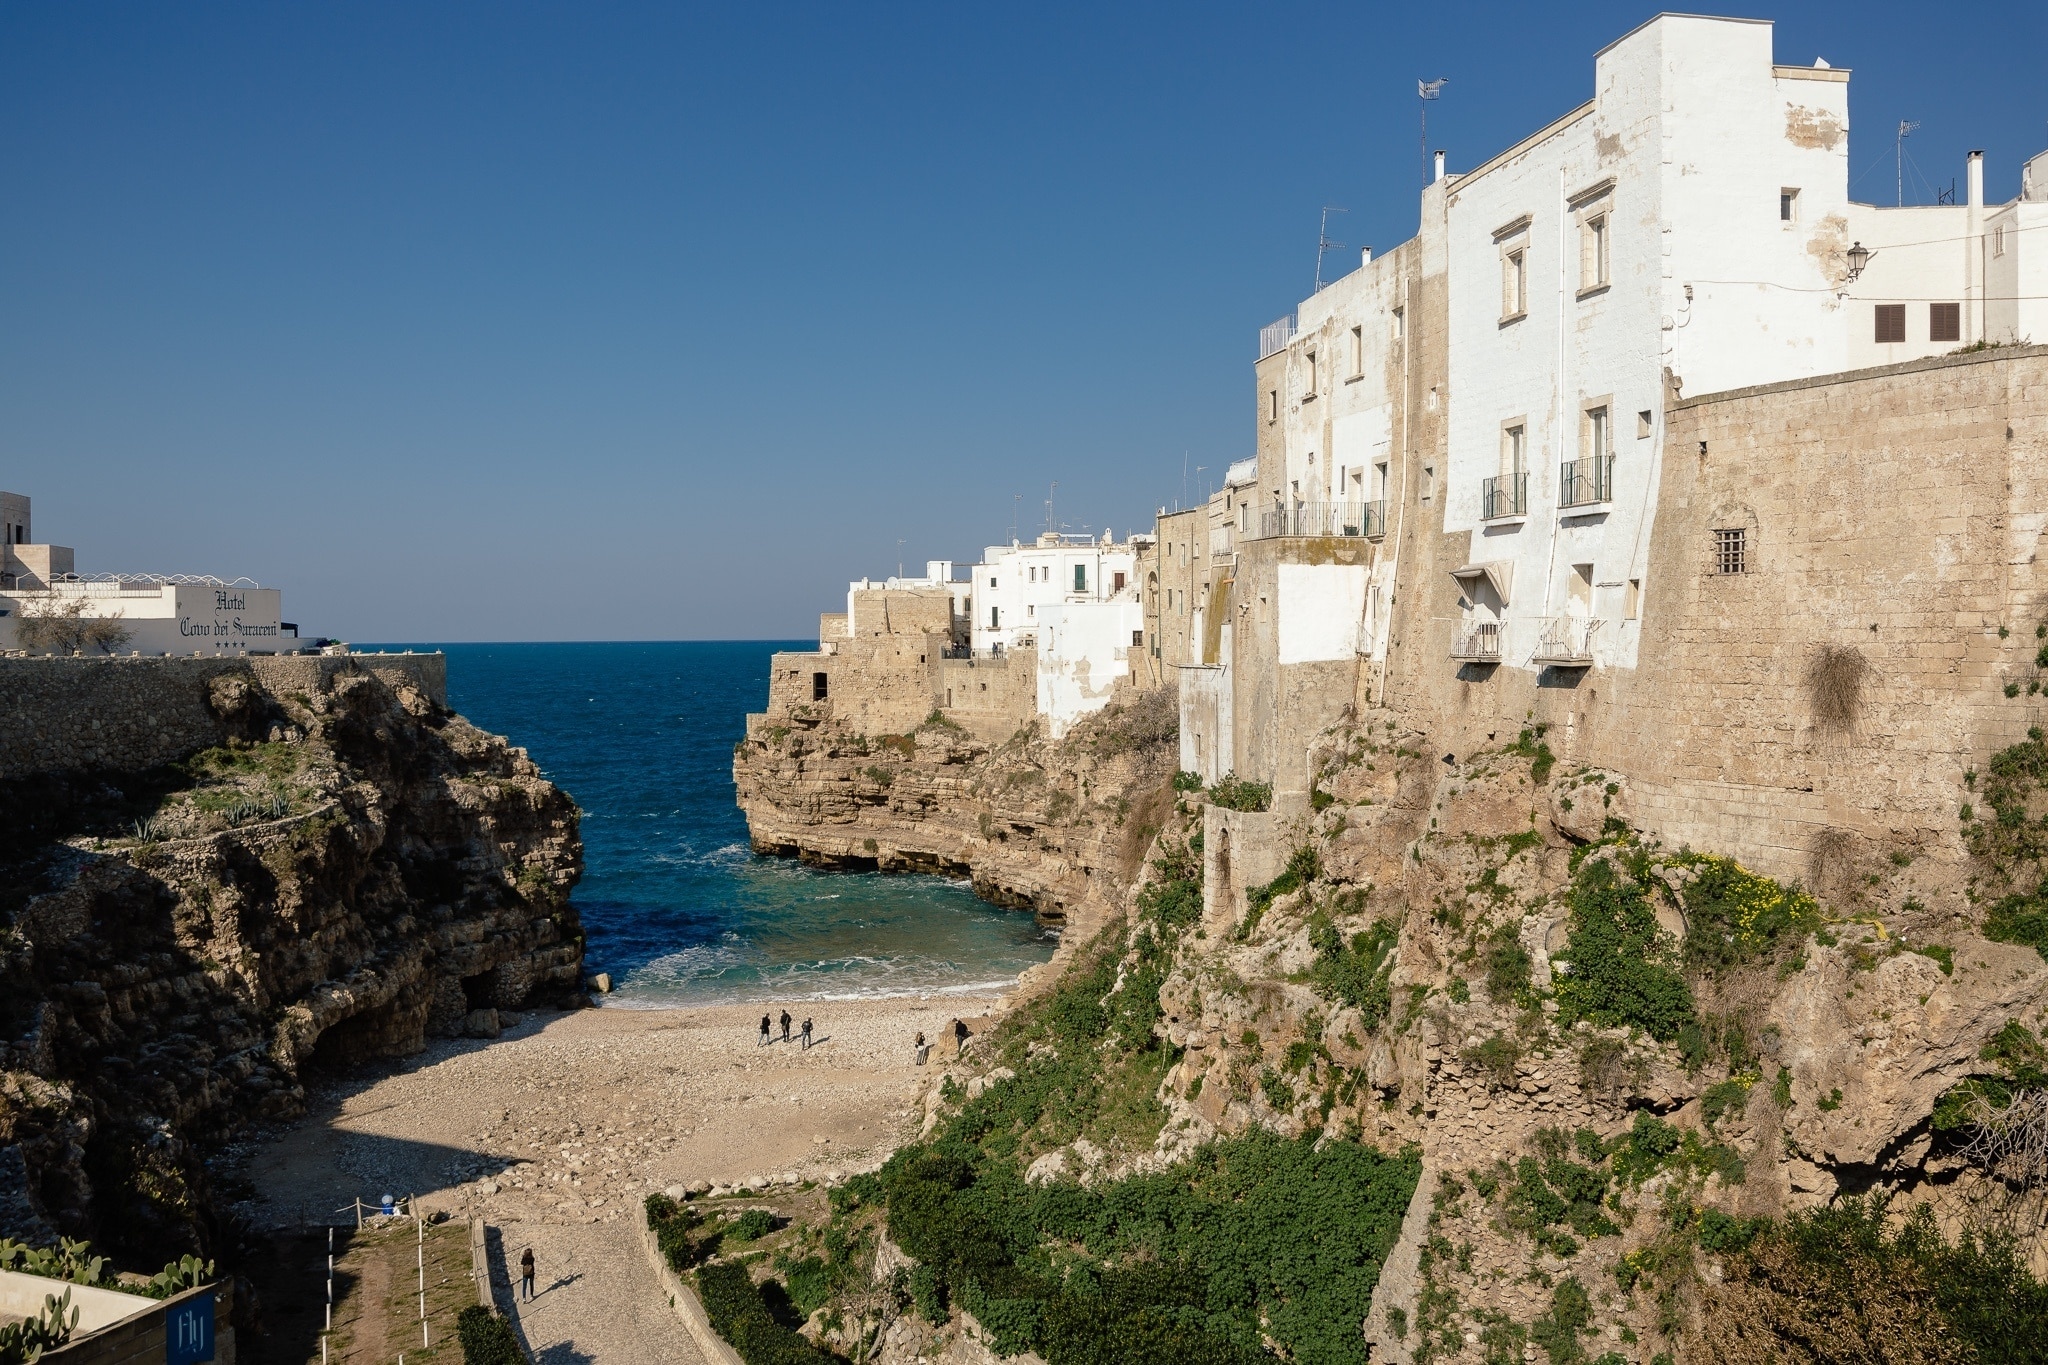 The "hidden" beach of the well-known town of Polignano a Mare in the south of Italy. 

The old town was built just on top of the cliff: often they organize big diving competition where all participants jump in the water directly from the houses's roof....and it's not rare to see some people jumping from the windows!

#BeachTips